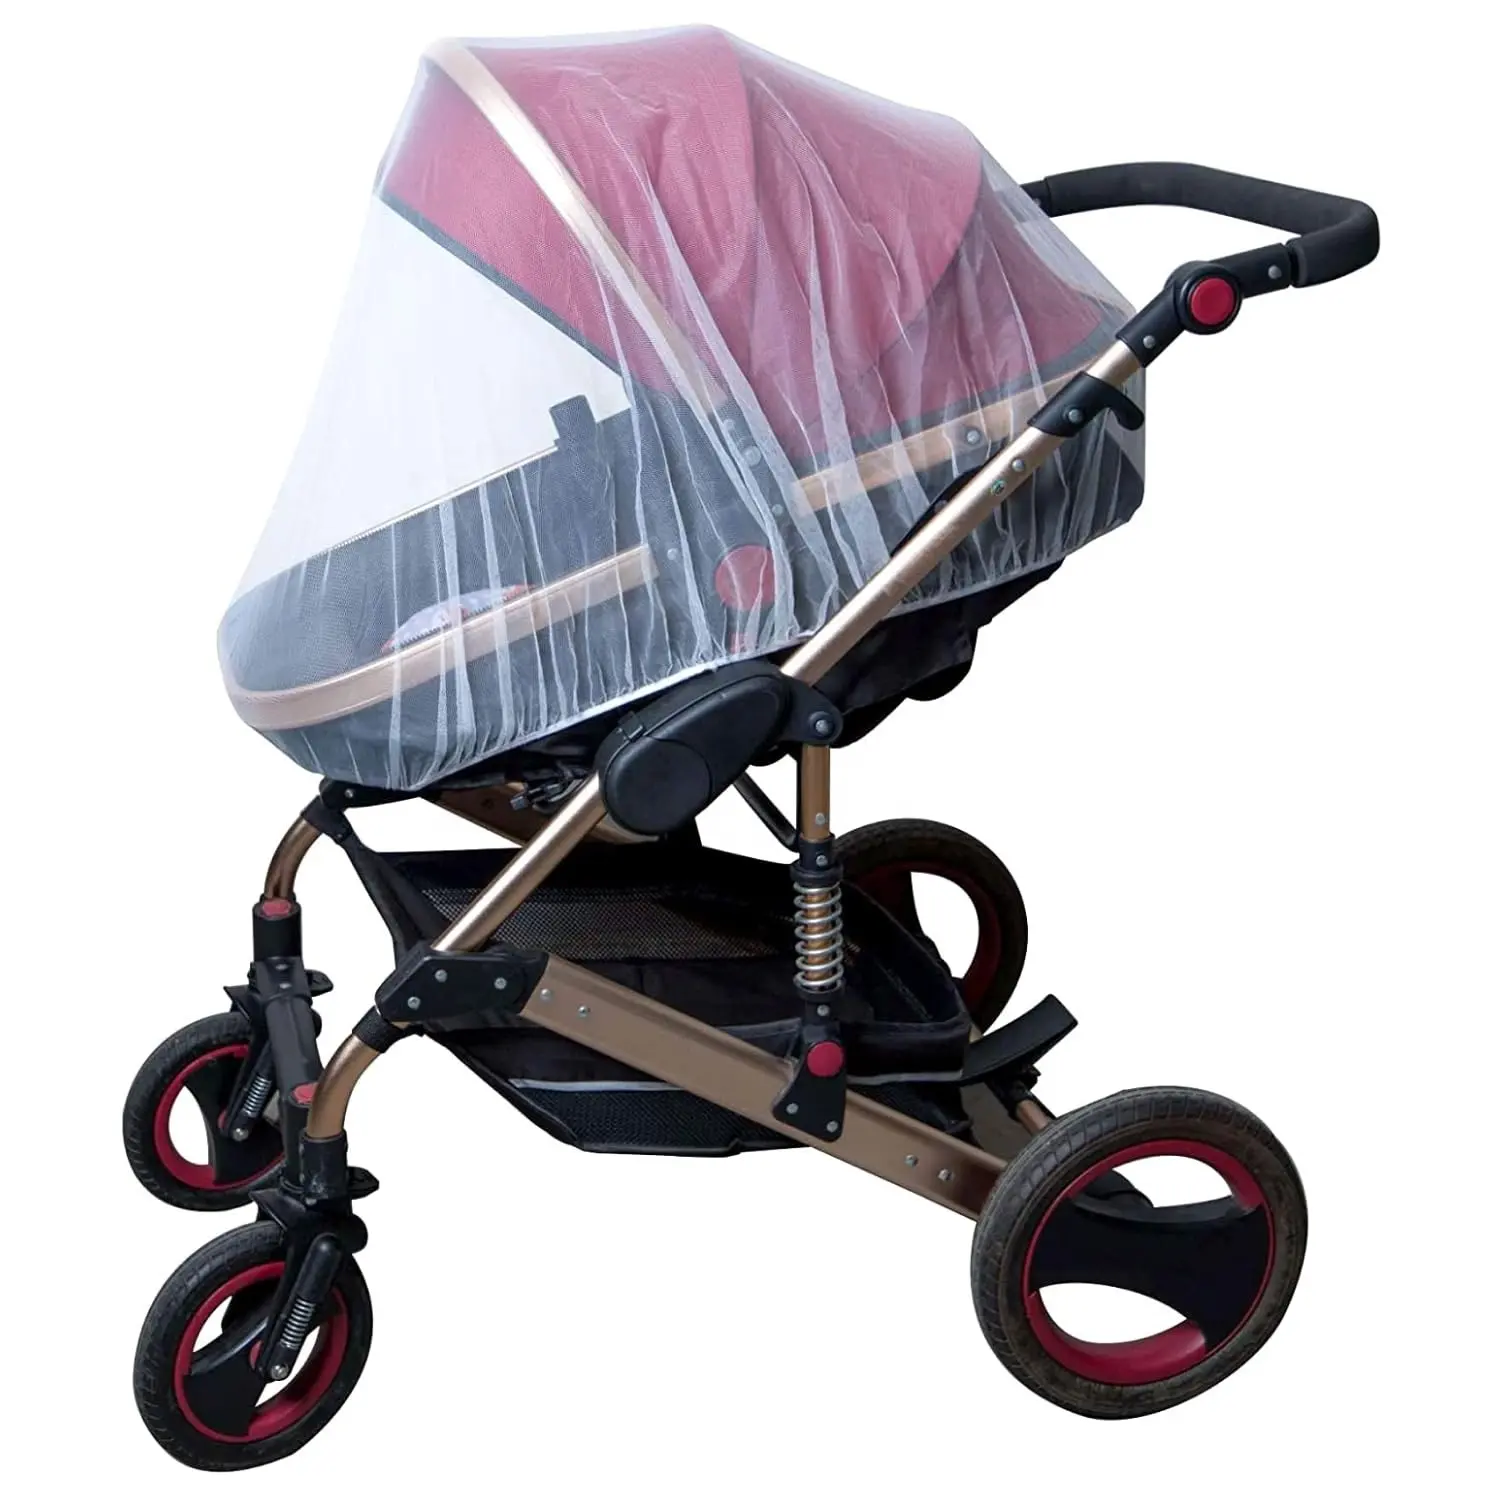 Enovoe Durable Baby Stroller Mosquito Net for Crib - Perfect Bug Net for Strollers, Bassinets, Cradles, Playards, Pack N Plays